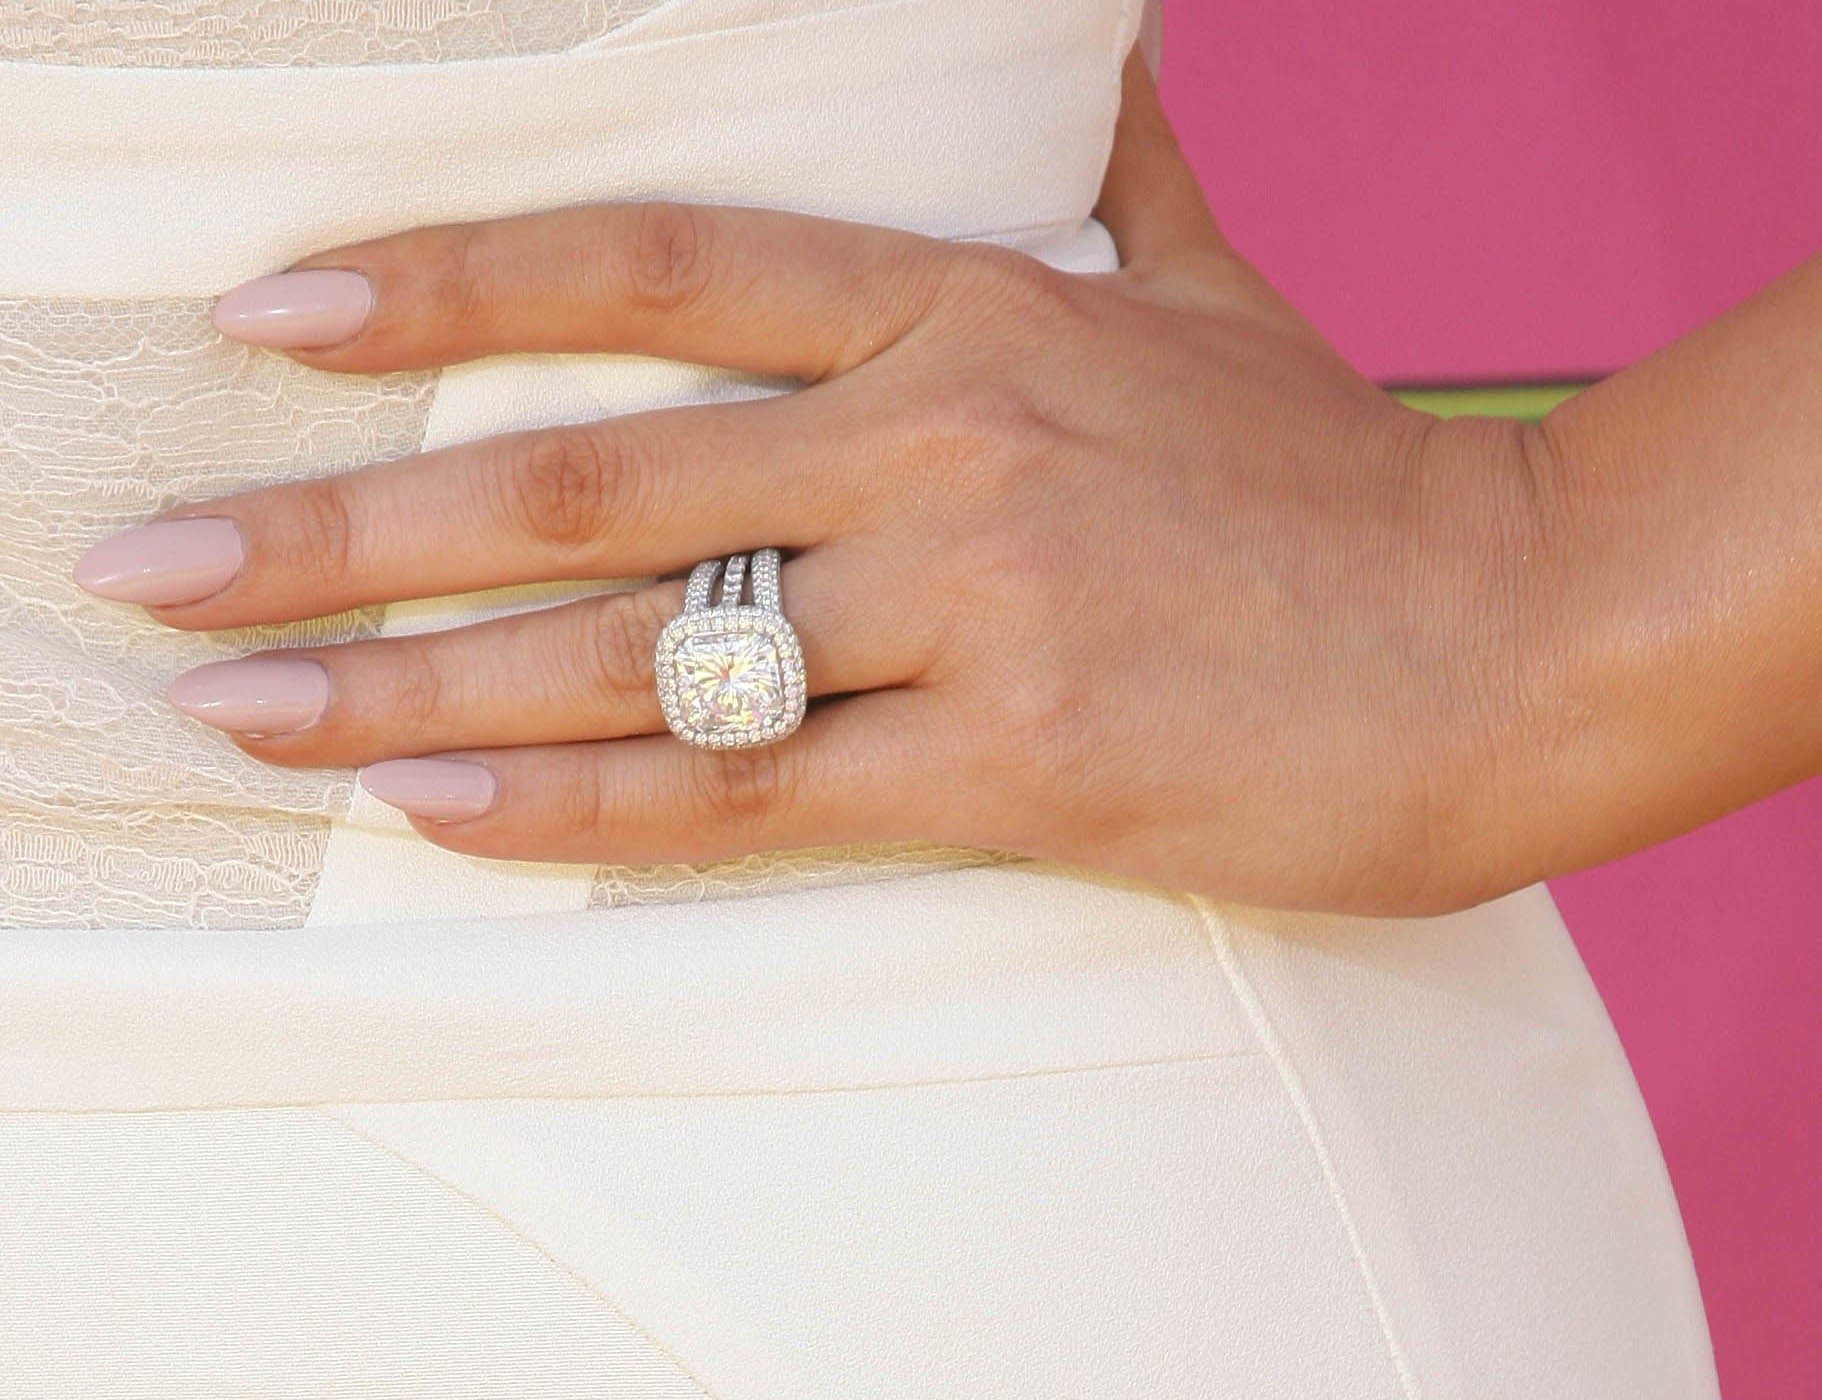 25 Most Expensive Celebrity Engagement Rings Ever (2021